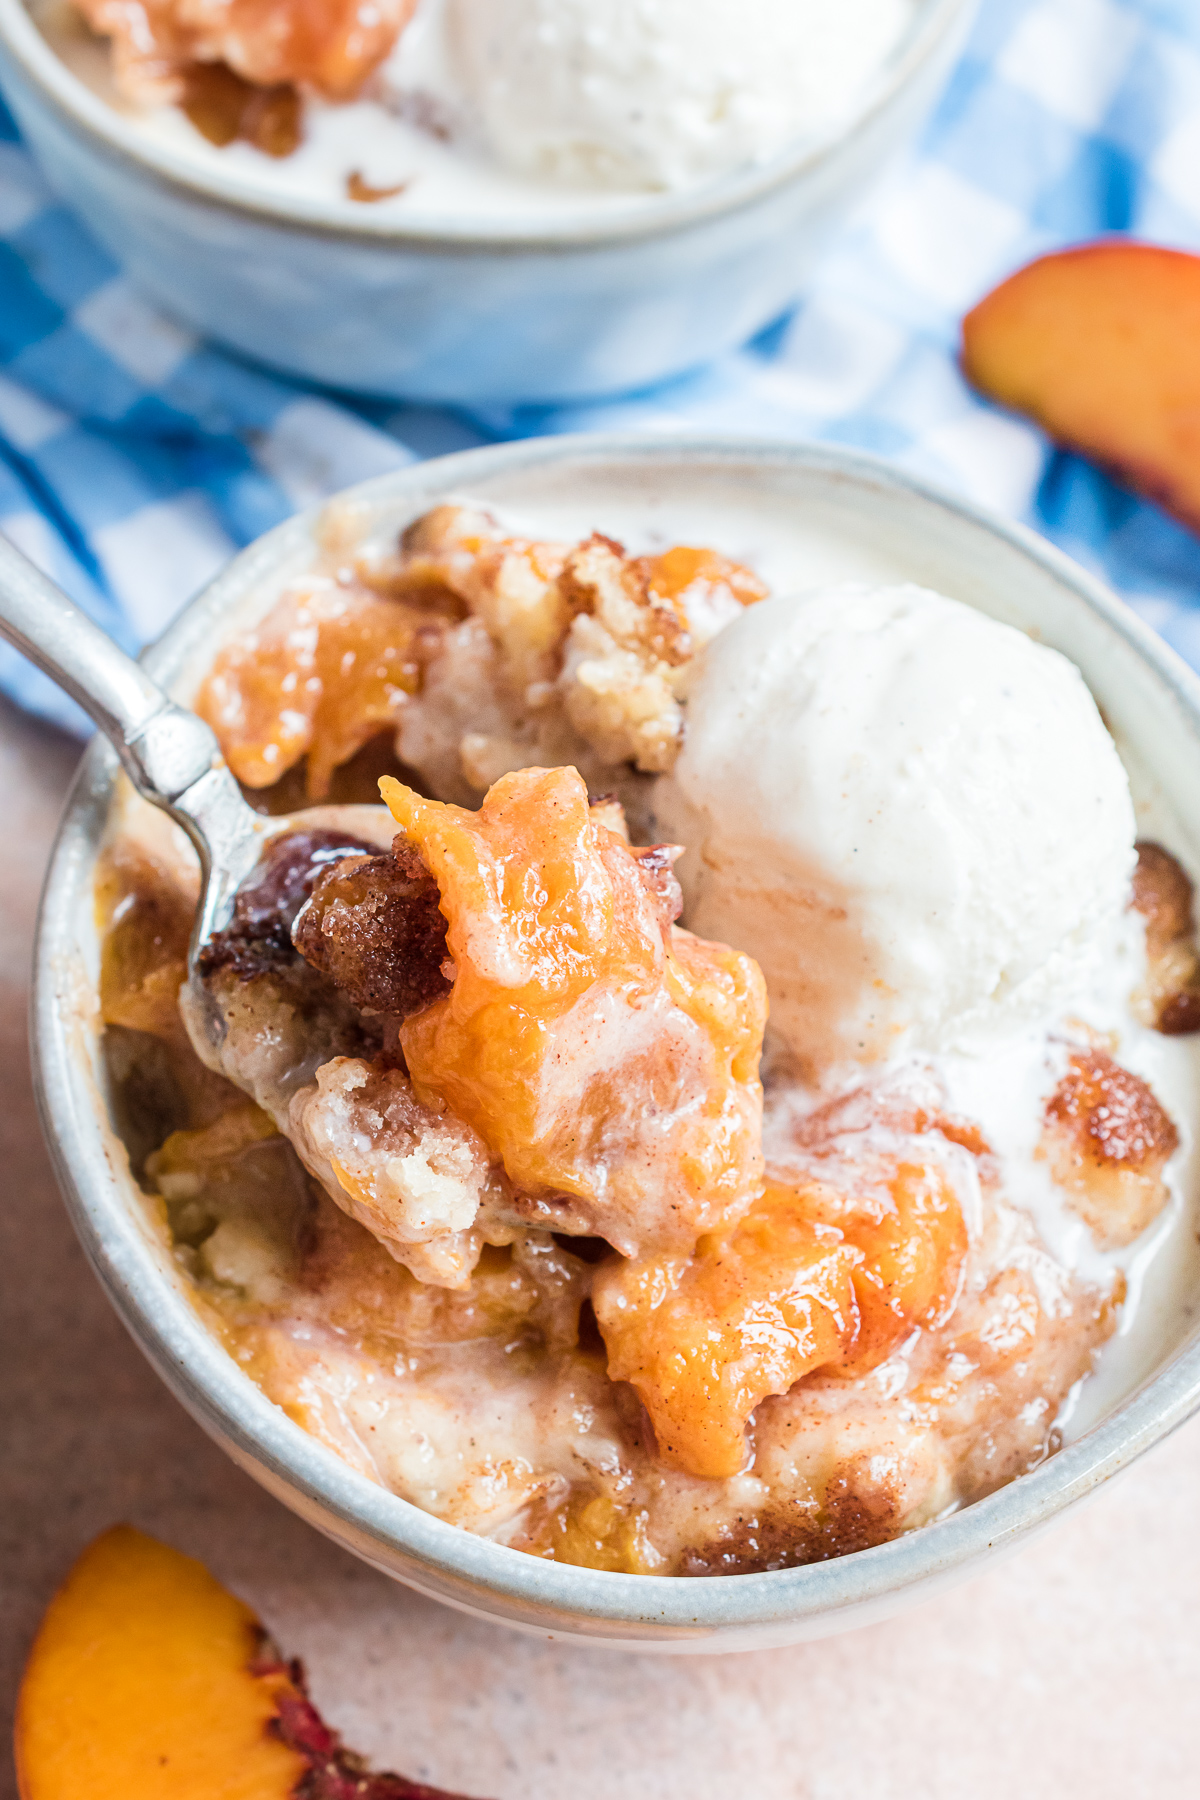 Peach cobbler in a small small bowl with a scoop of vanilla ice cream that is melting over the cobbler.